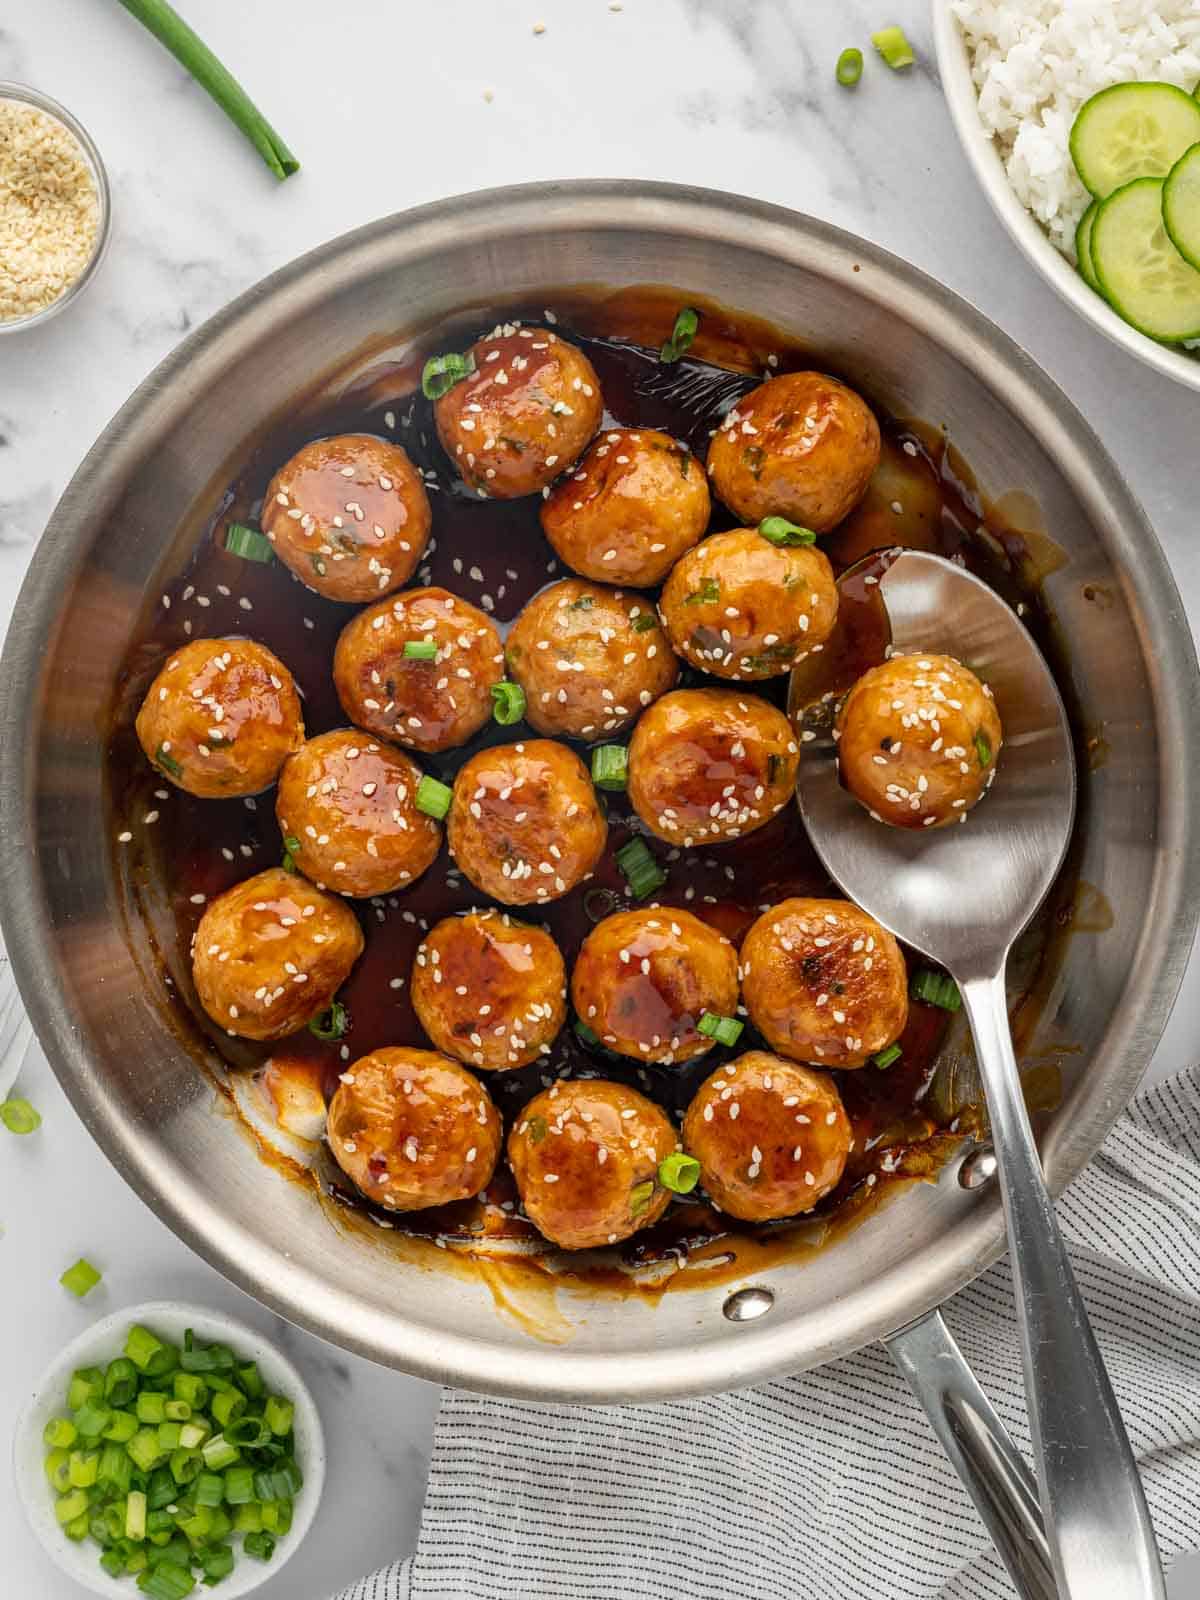 A spoon lifts a teriyaki meatball from a skillet.